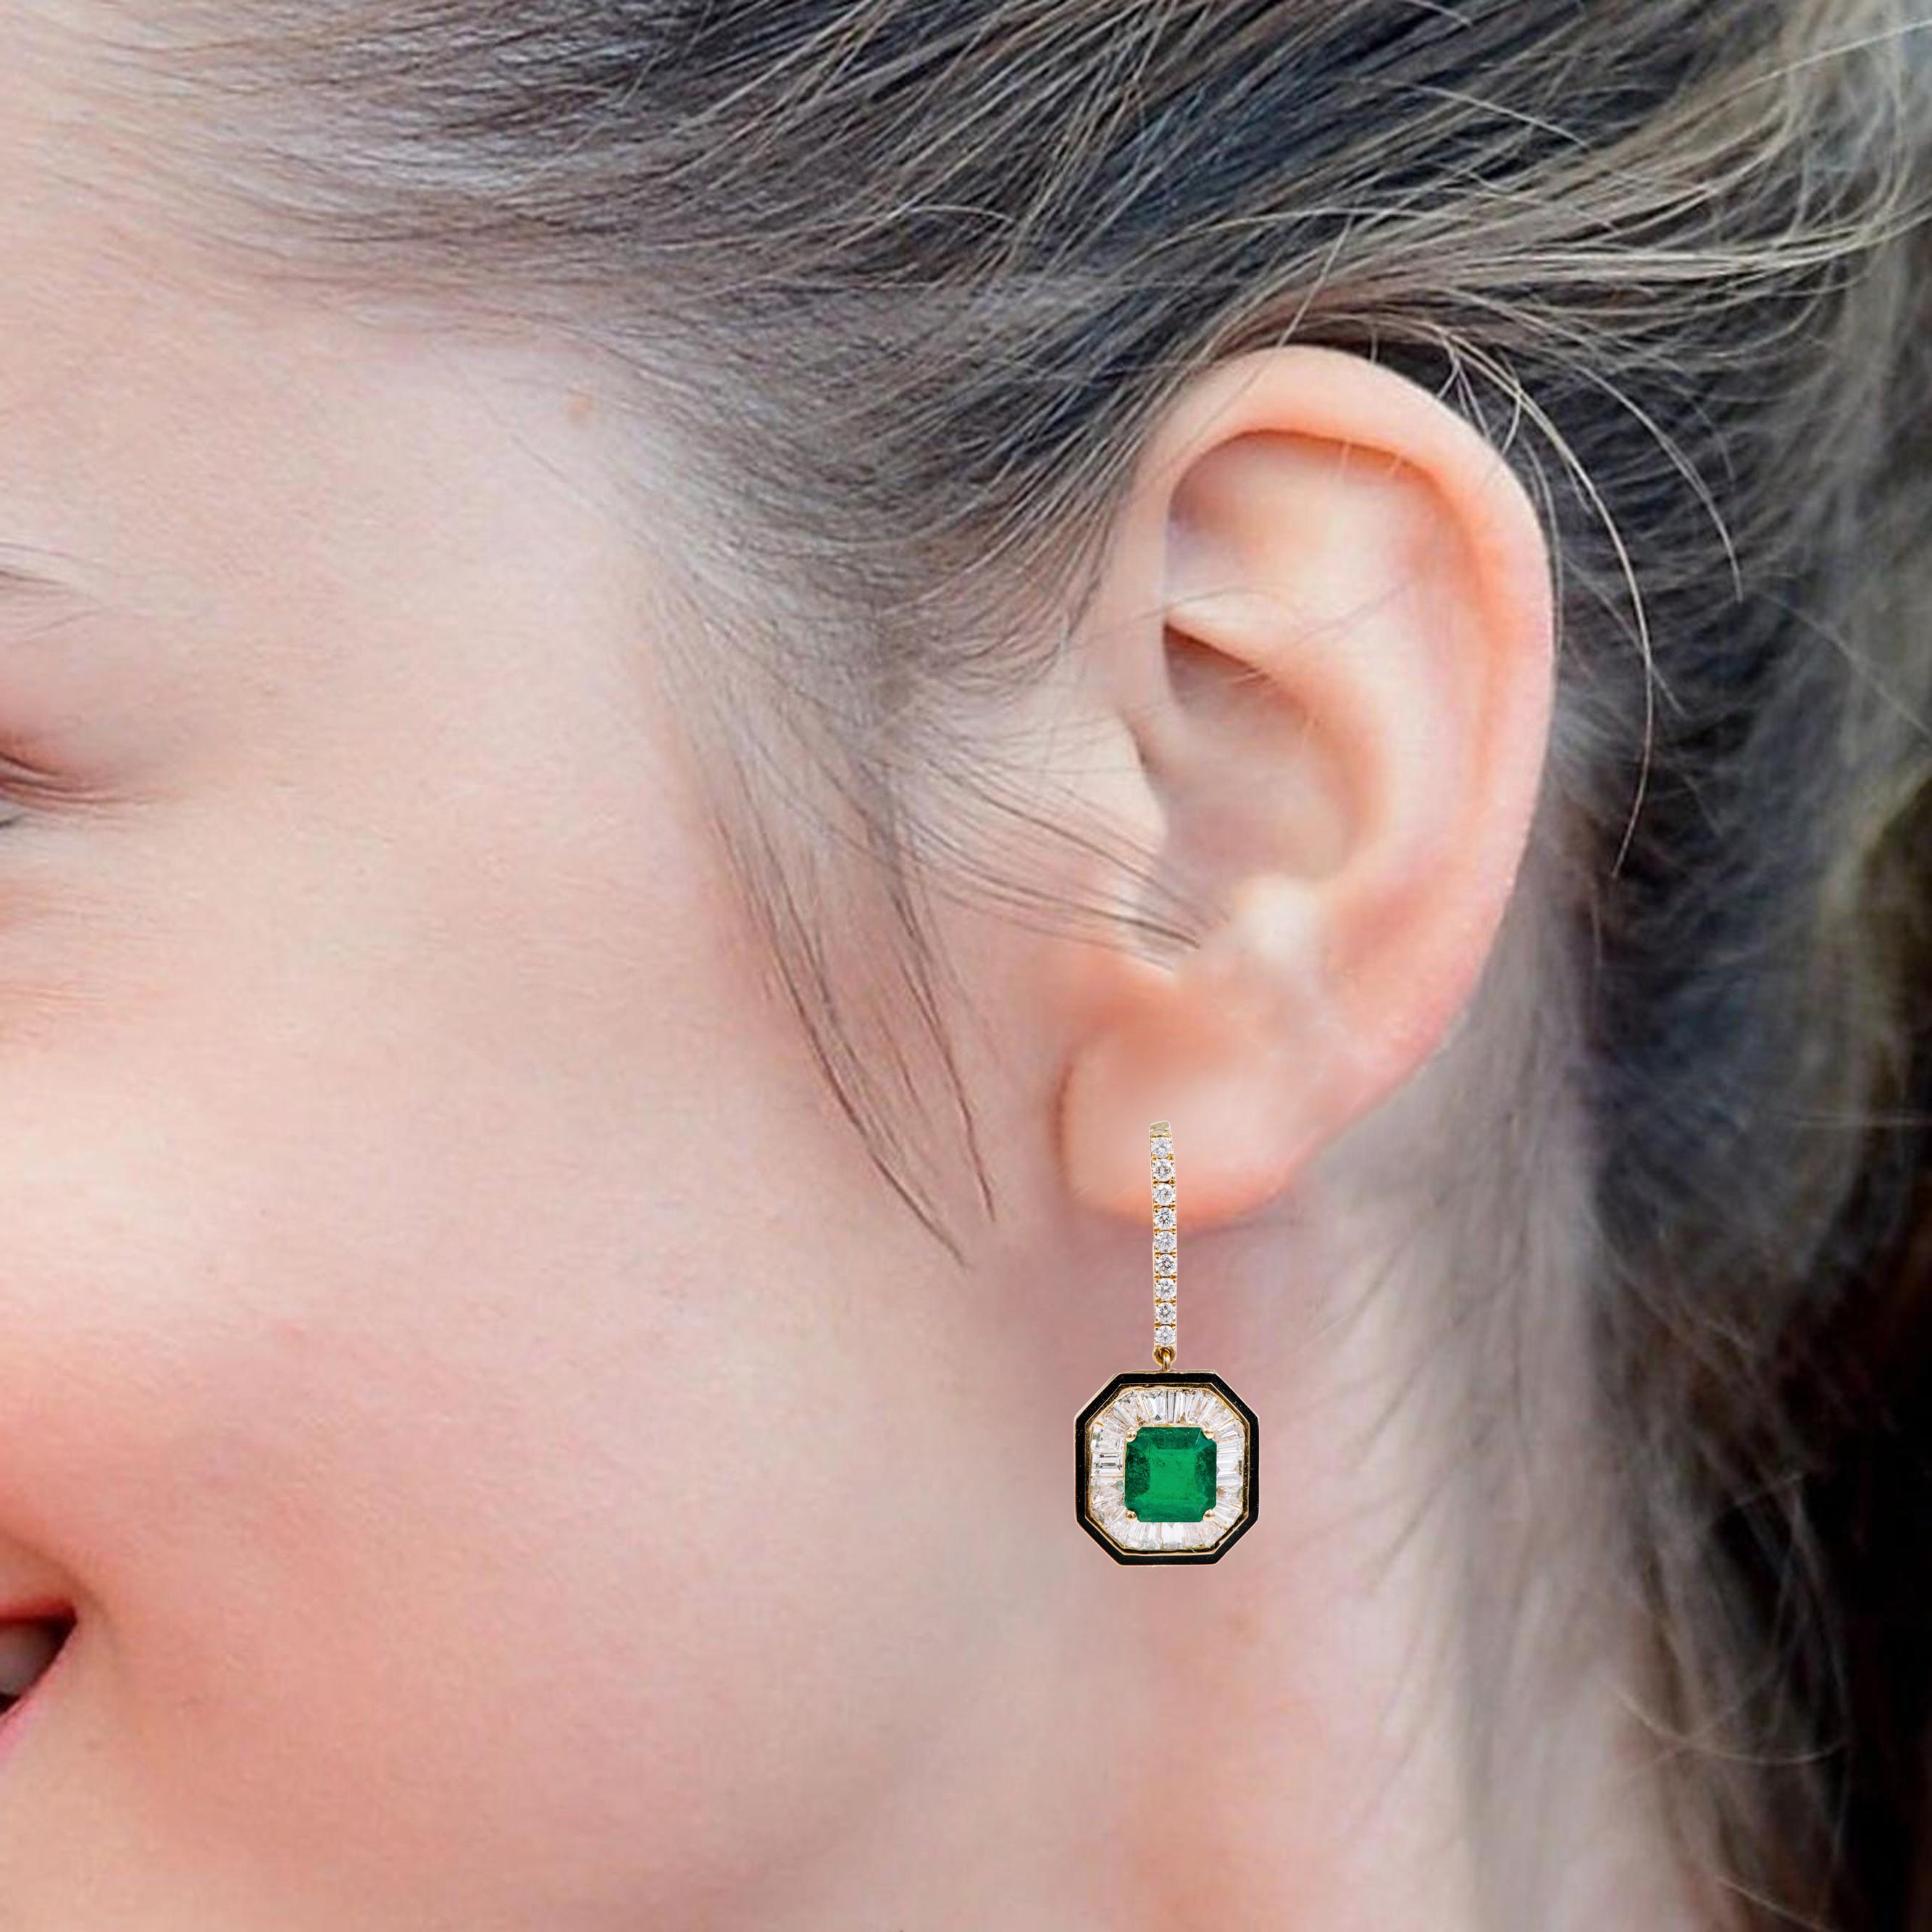 18 Karat Gold 3.25 Carat Emerald and Diamond Dangle Earrings

Indulge in timeless elegance with our 3.25 Carat Emerald and Diamond Dangle Earrings—a captivating pair that marries the allure of emeralds, diamonds, and exquisite black enamel